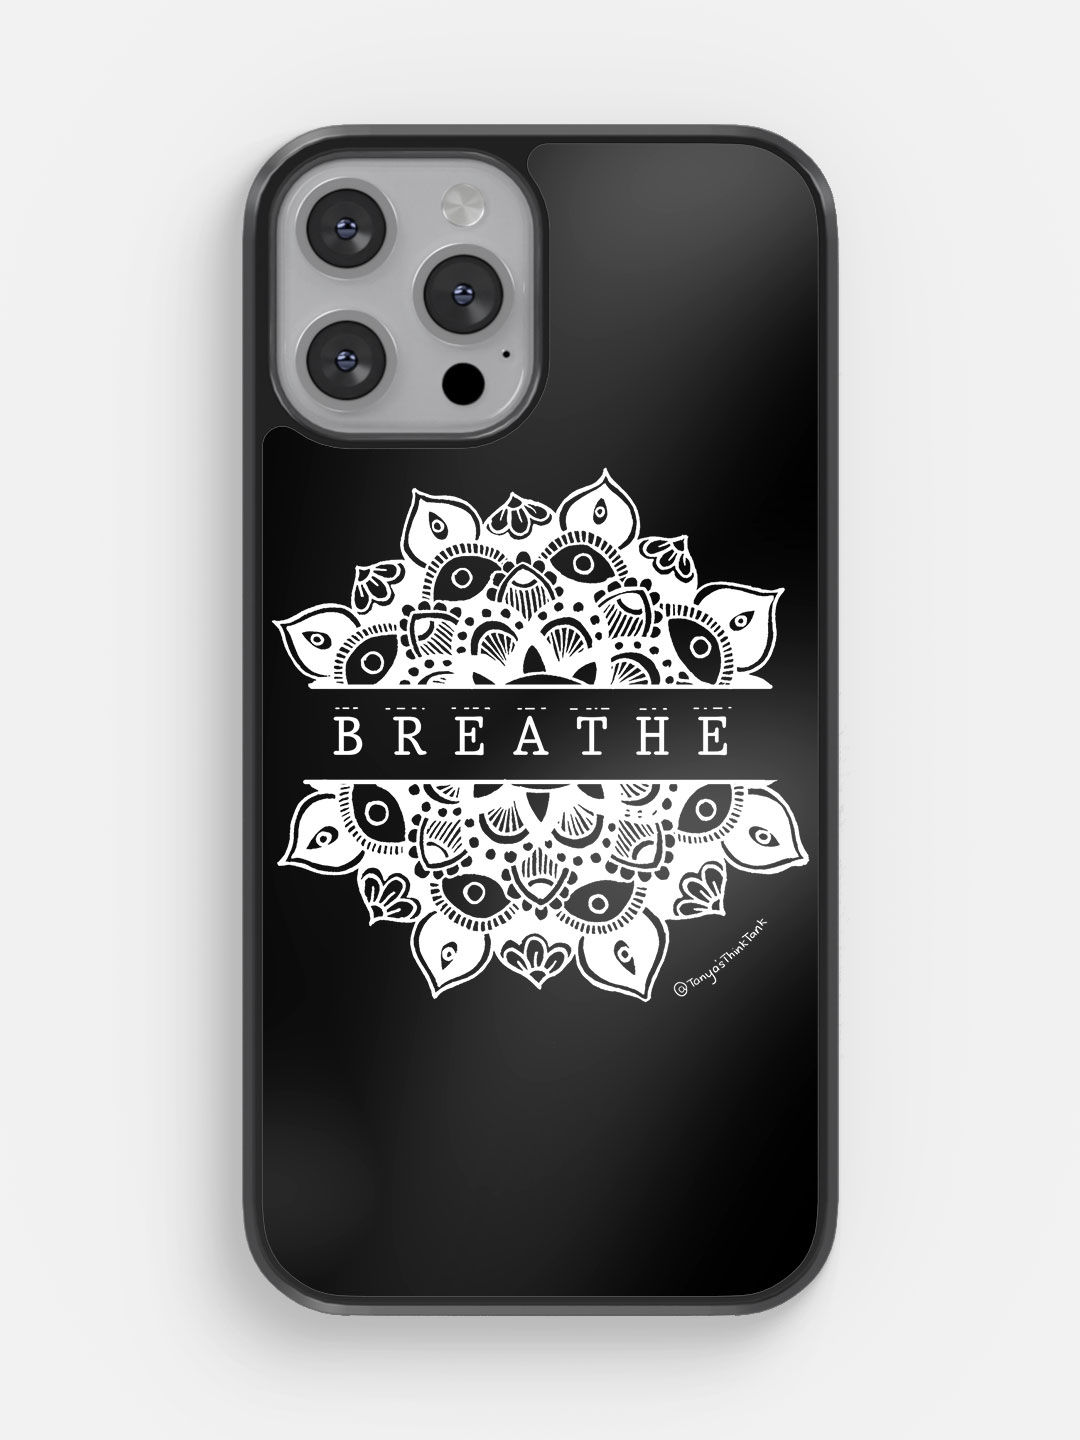 Buy Breathe White - Bumper Phone Case for iPhone 12 Pro Max Phone Cases & Covers Online